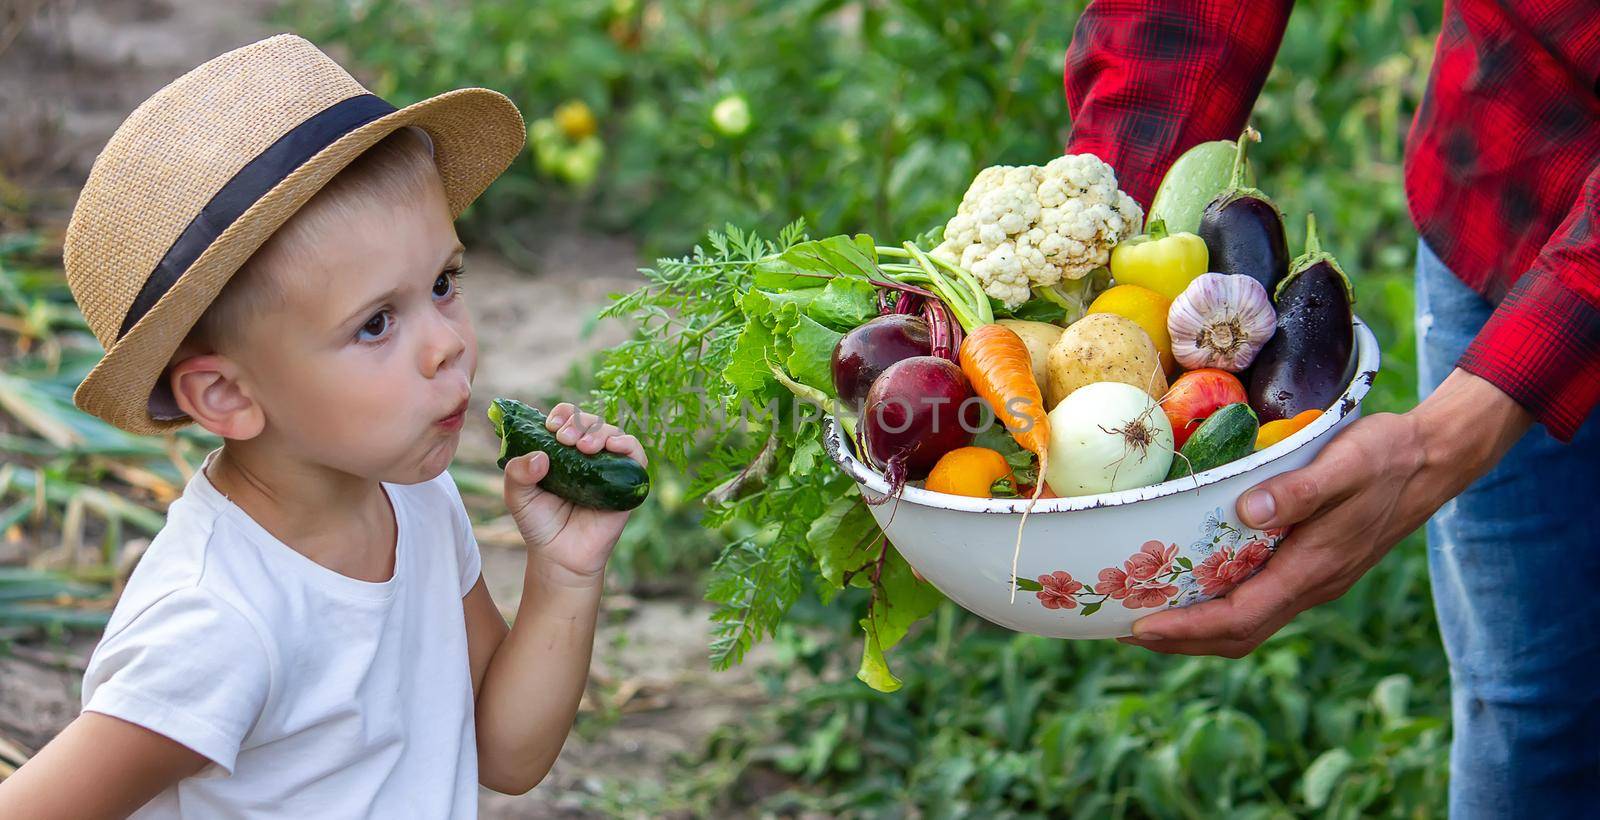 a man holds a bowl of fresh vegetables from the farm in his hands. Nature. Selective focus